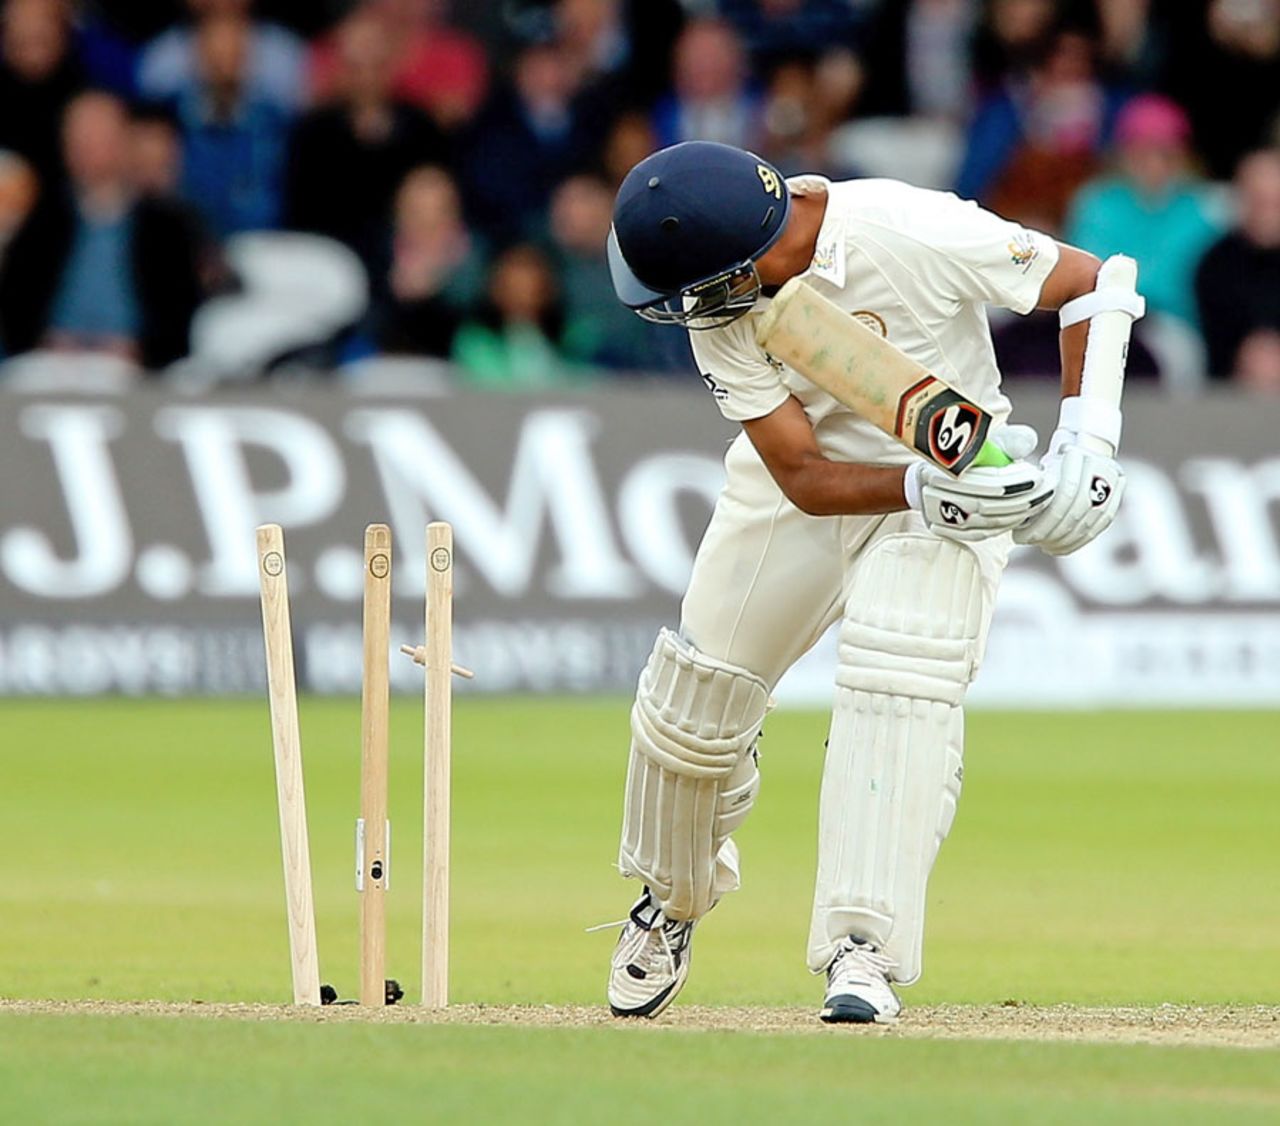 Rahul Dravid was bowled for a first-ball duck, MCC v Rest of the World XI, Lord's, July 5, 2014